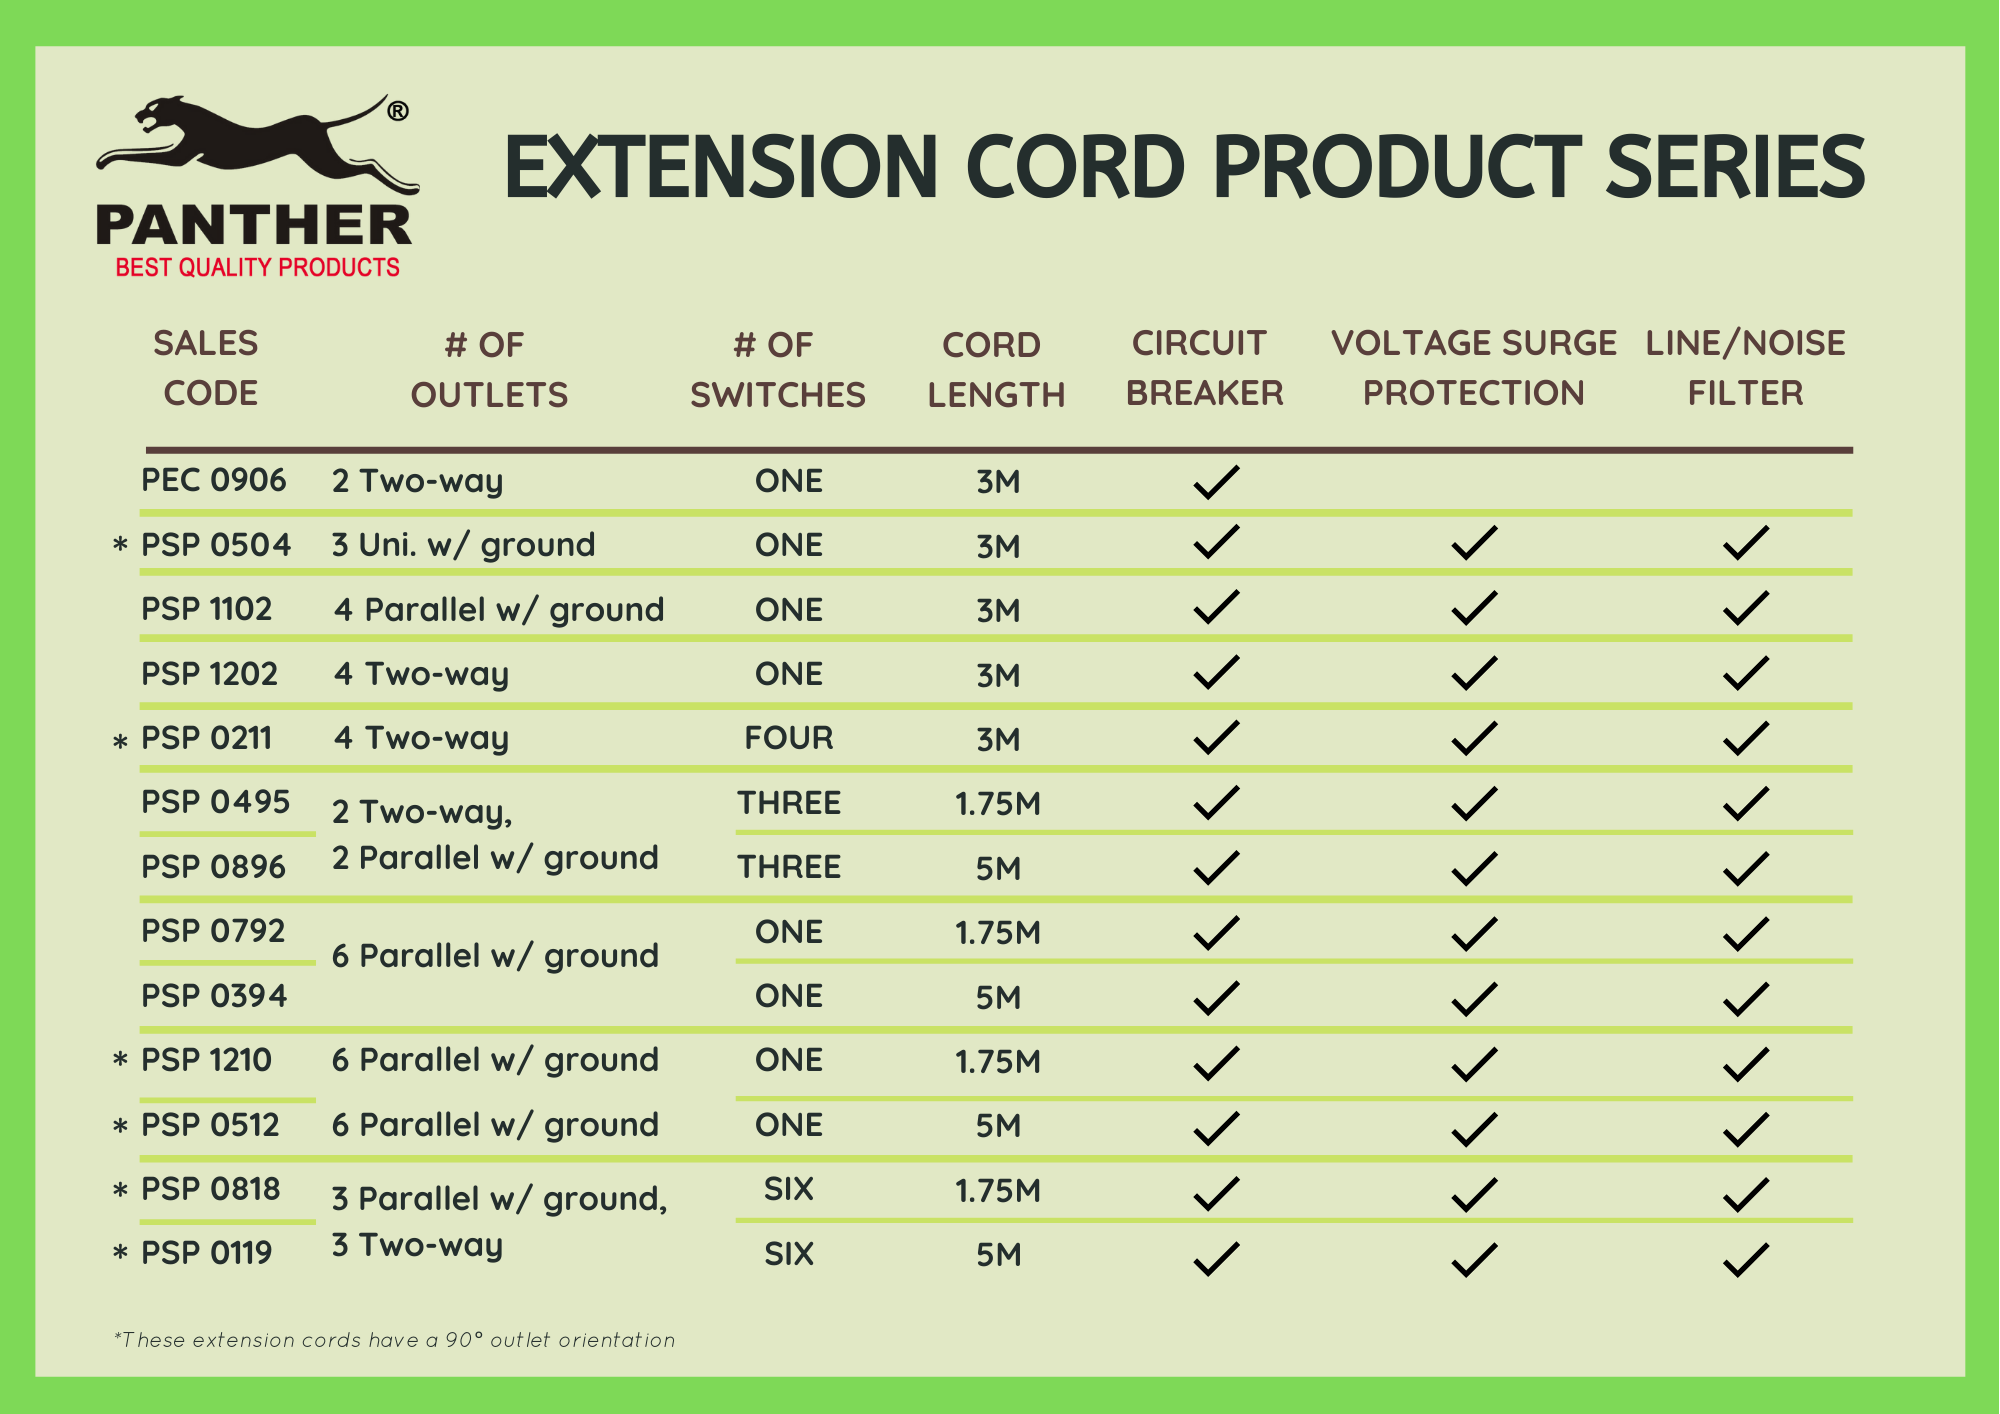 Specification list of Panther metal extension cord models available in the Philippines